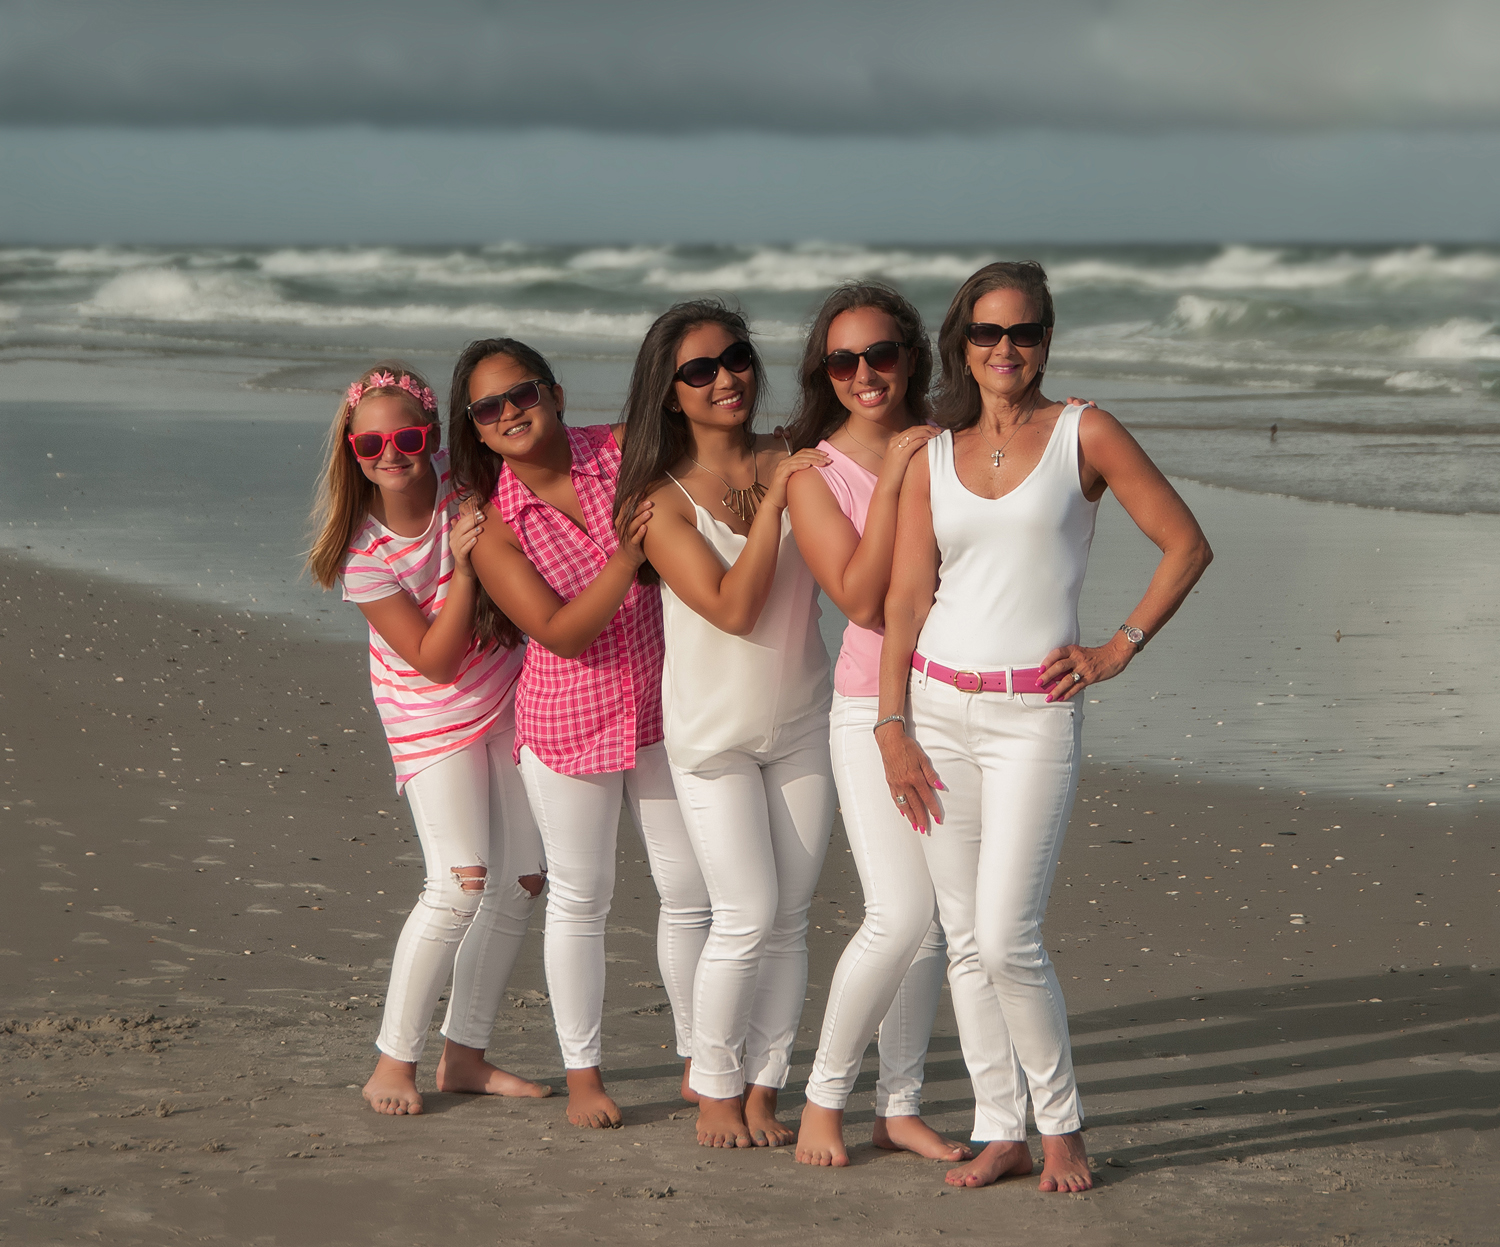 These ladies dressed for Luxury with Photographers in Wrightsville Beach, NC.